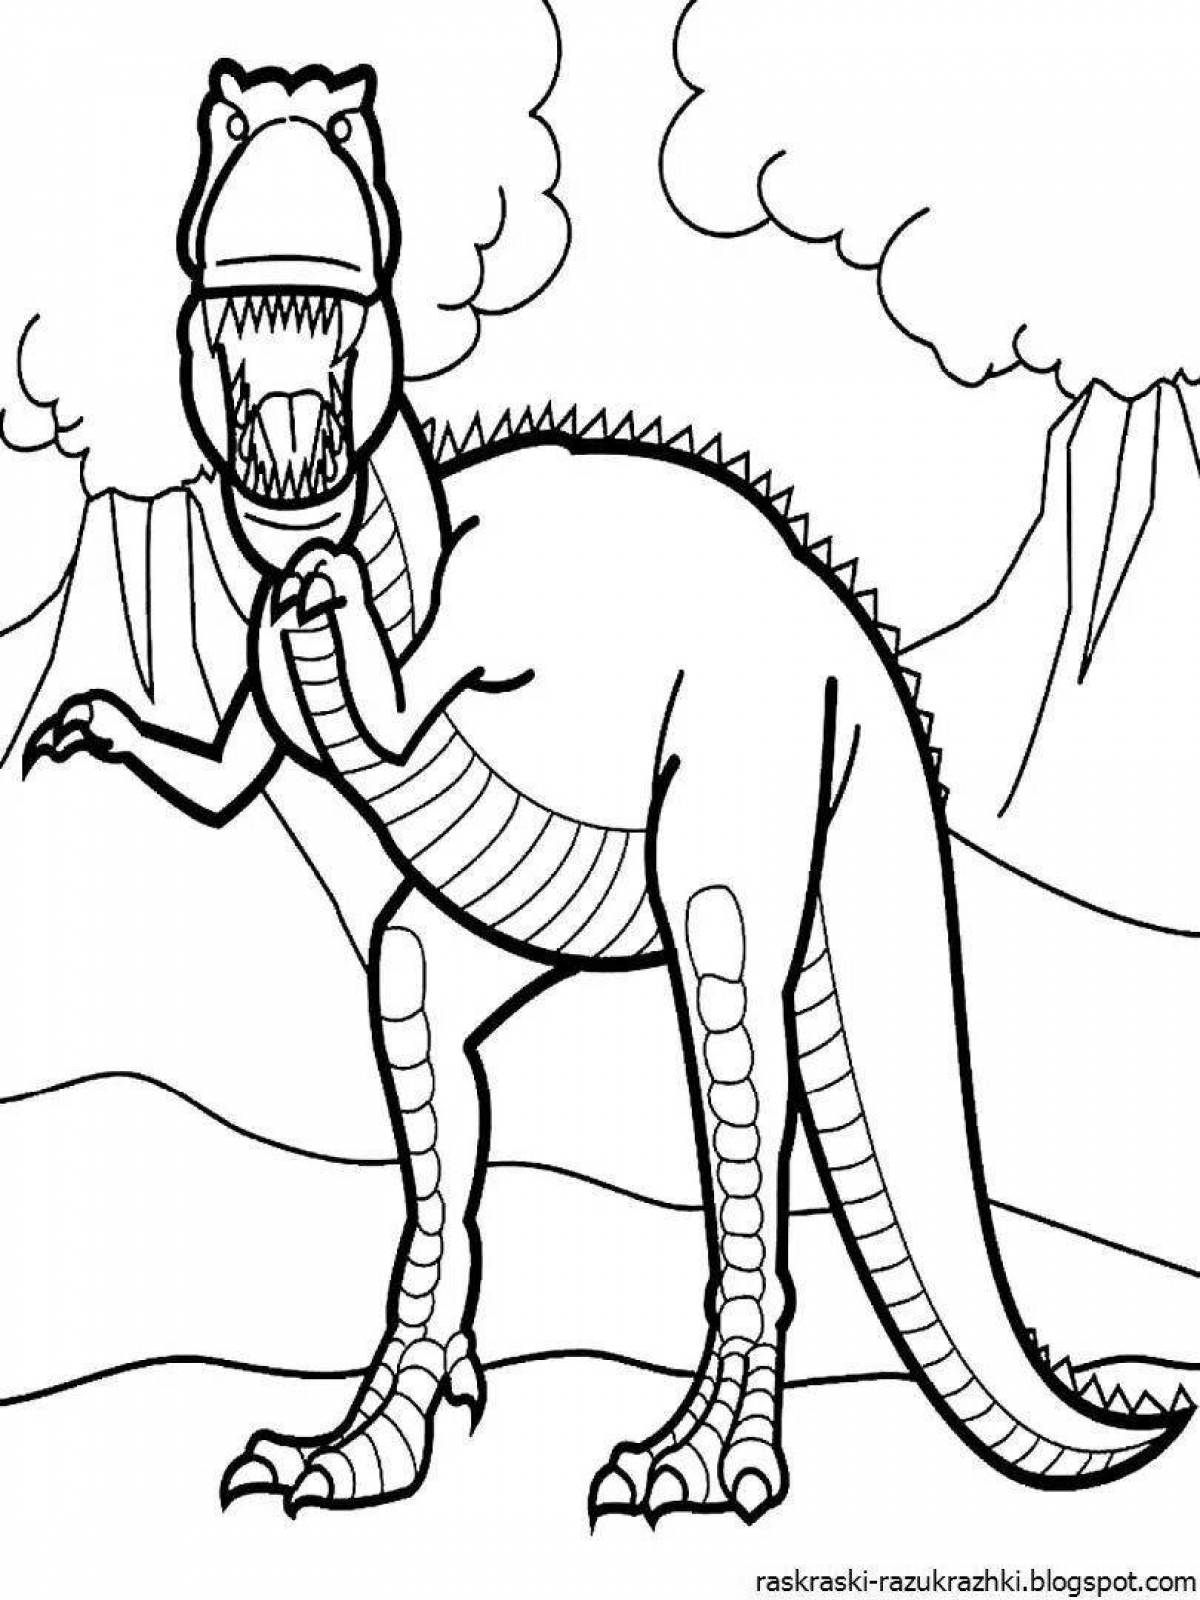 Adorable dinosaur coloring book for girls